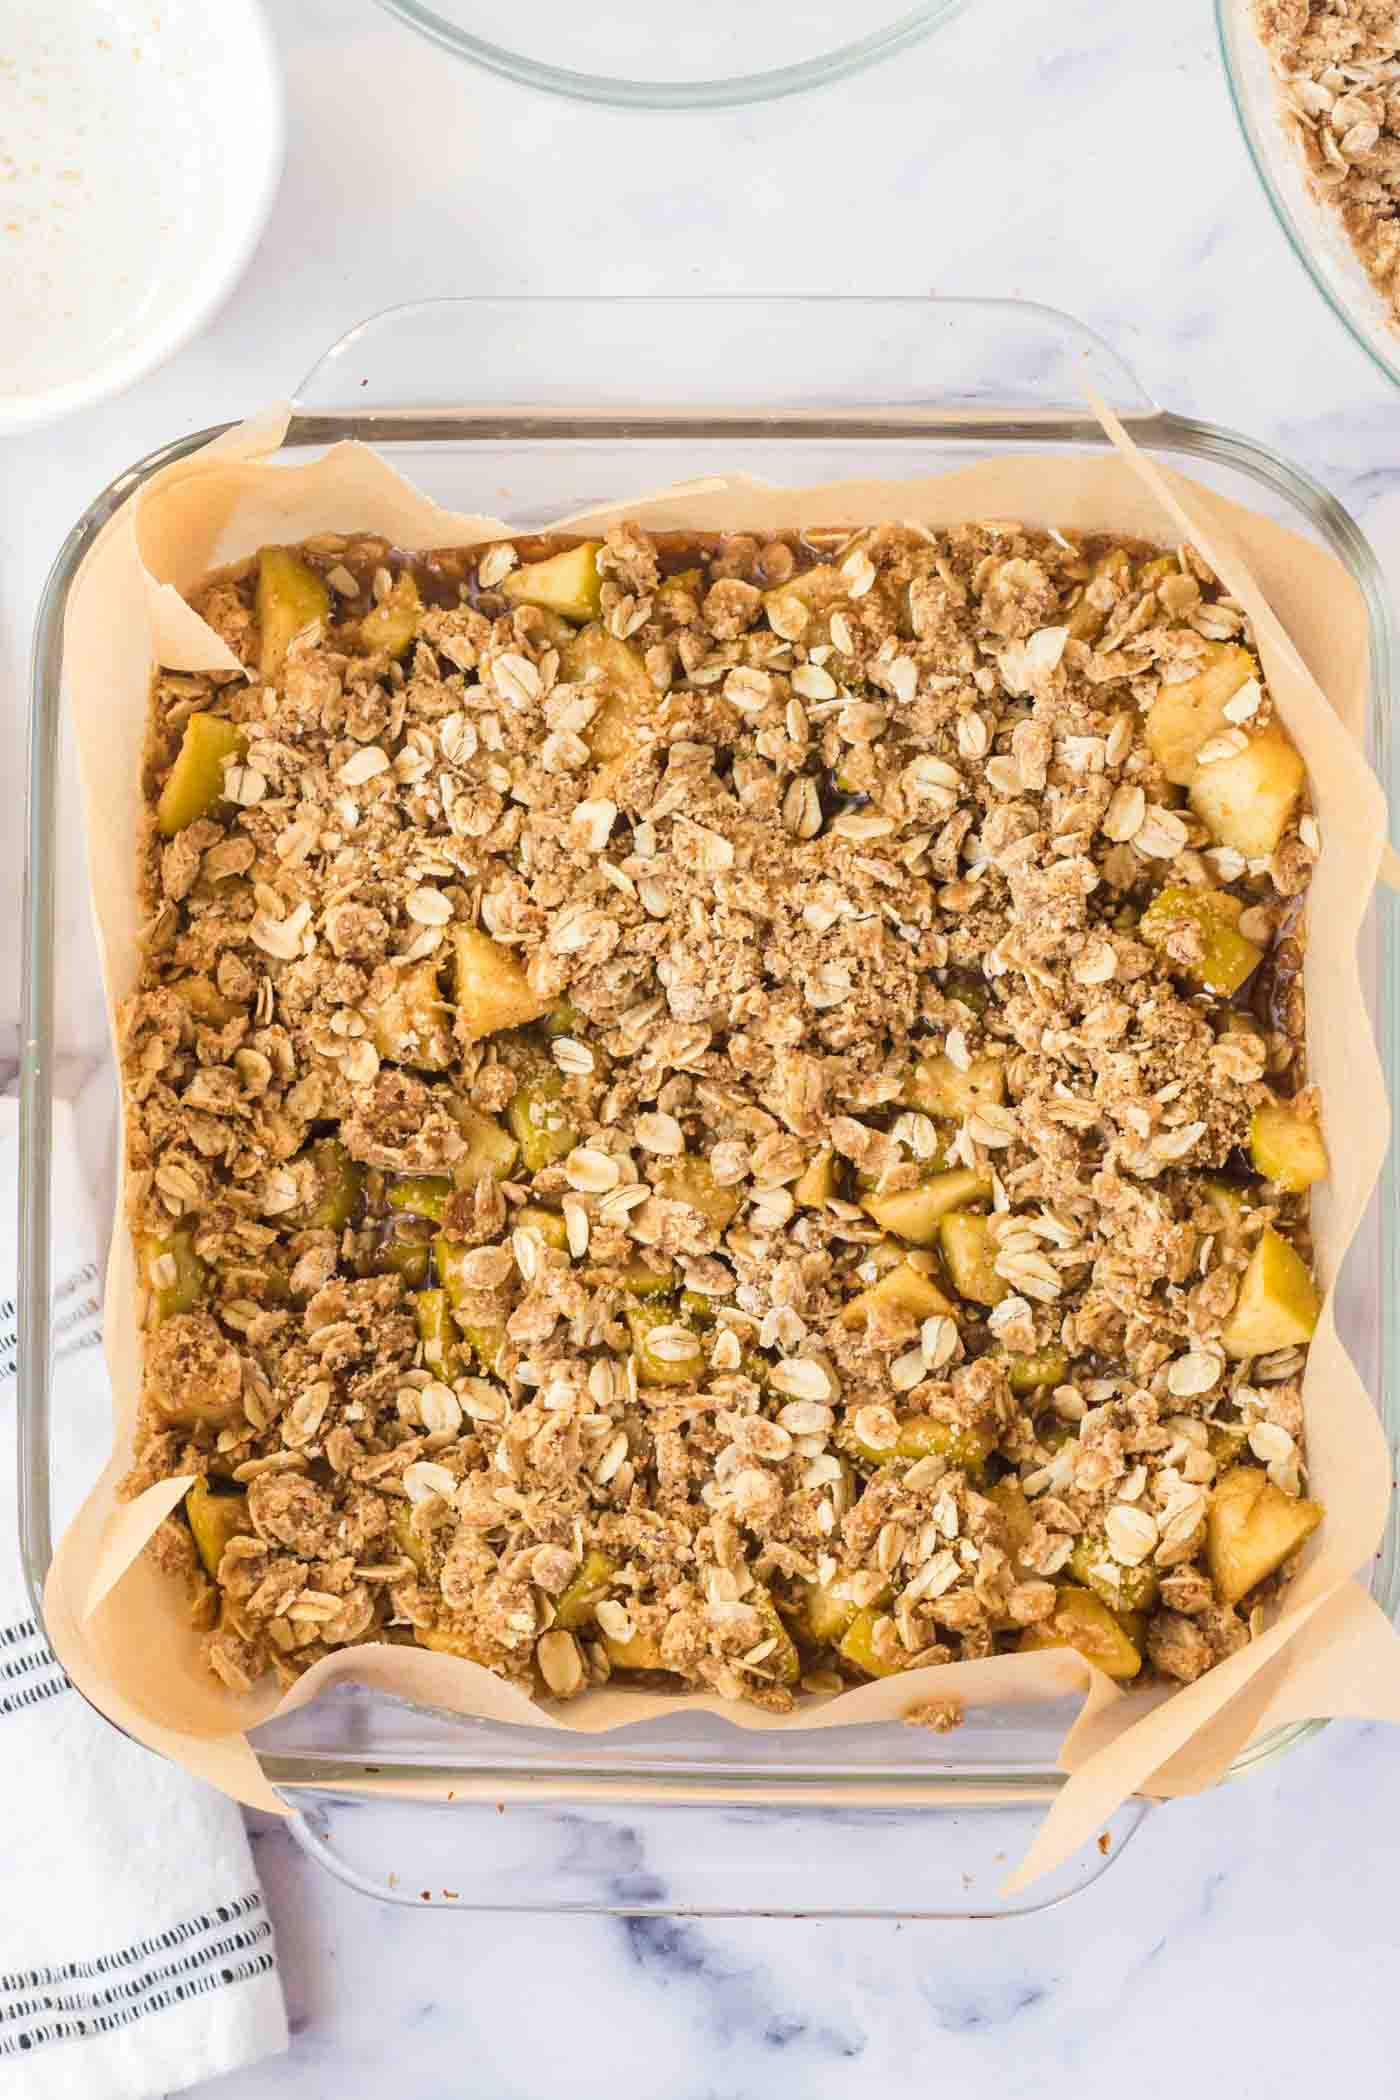 Oatmeal streusel topping sprinkled over apple crumble bars in a square glass baking dish.